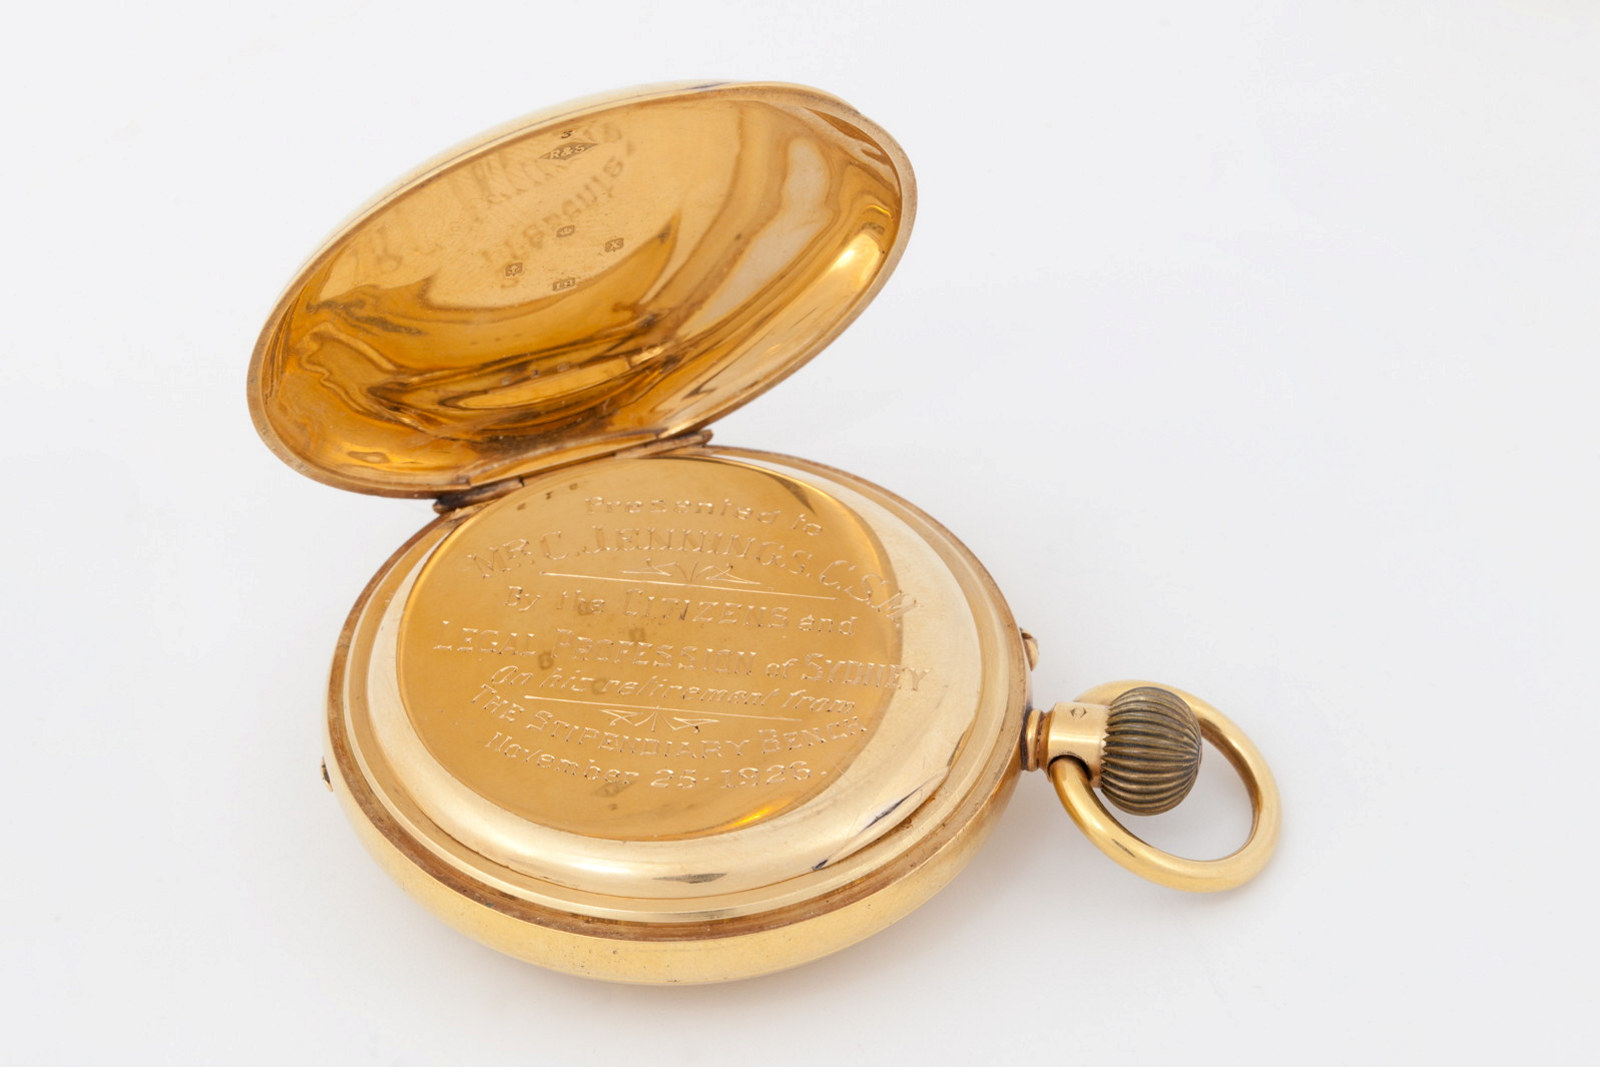 Gold pocket watch presented to magistrate Charles Jennings on his retirement, 26 November 1926